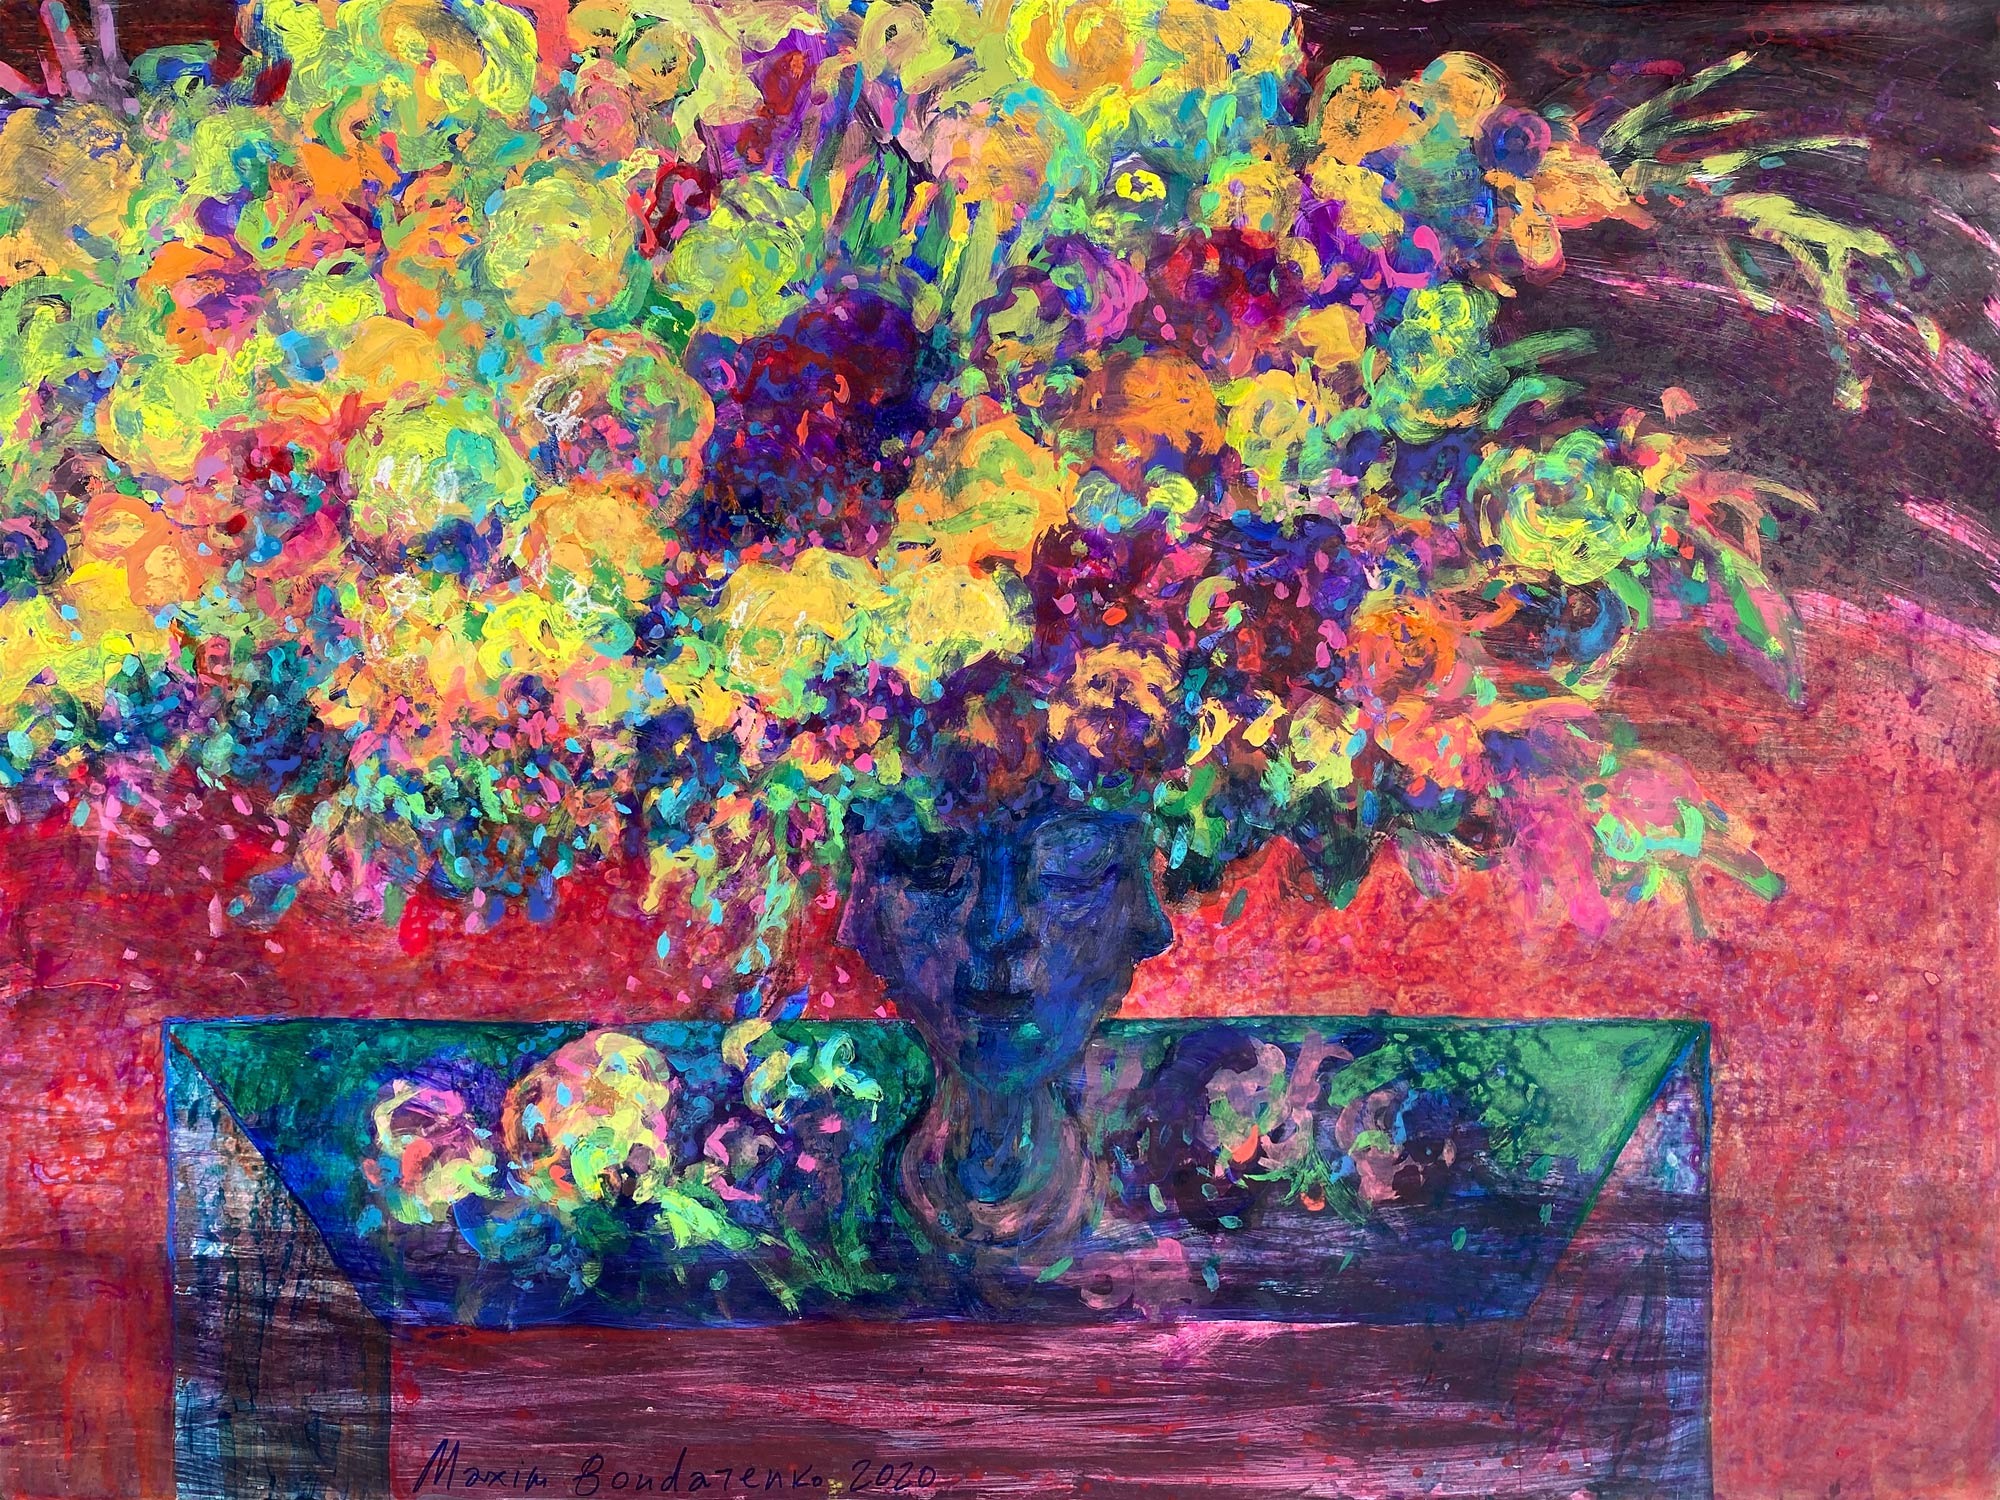 Flowers in Electric Light. 2020 Acrylic and tempera on cardboard 30" x 40" (76.2 x 101.6 cm).